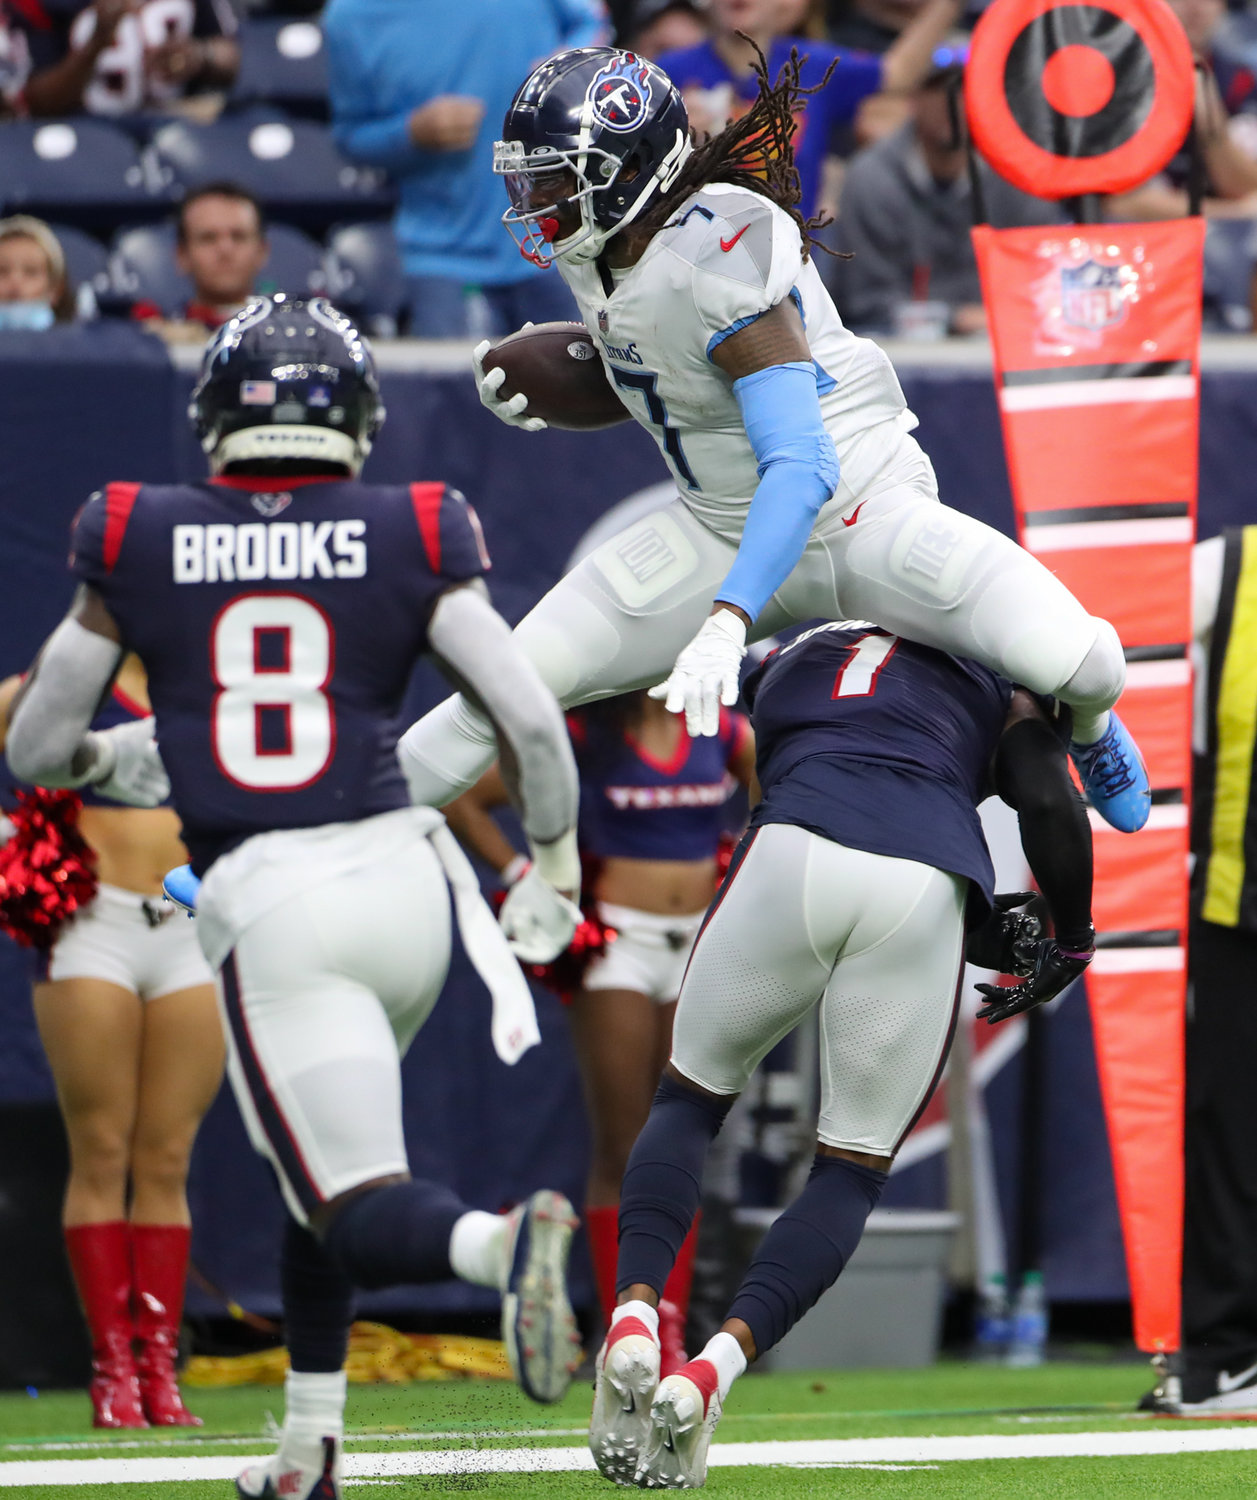 Tennessee Titans running back D'Onta Foreman (7) hurdles Houston Texans cornerback Lonnie Johnson Jr. (1) during an NFL game between the Texans and the Titans on Jan. 9, 2022 in Houston, Texas.